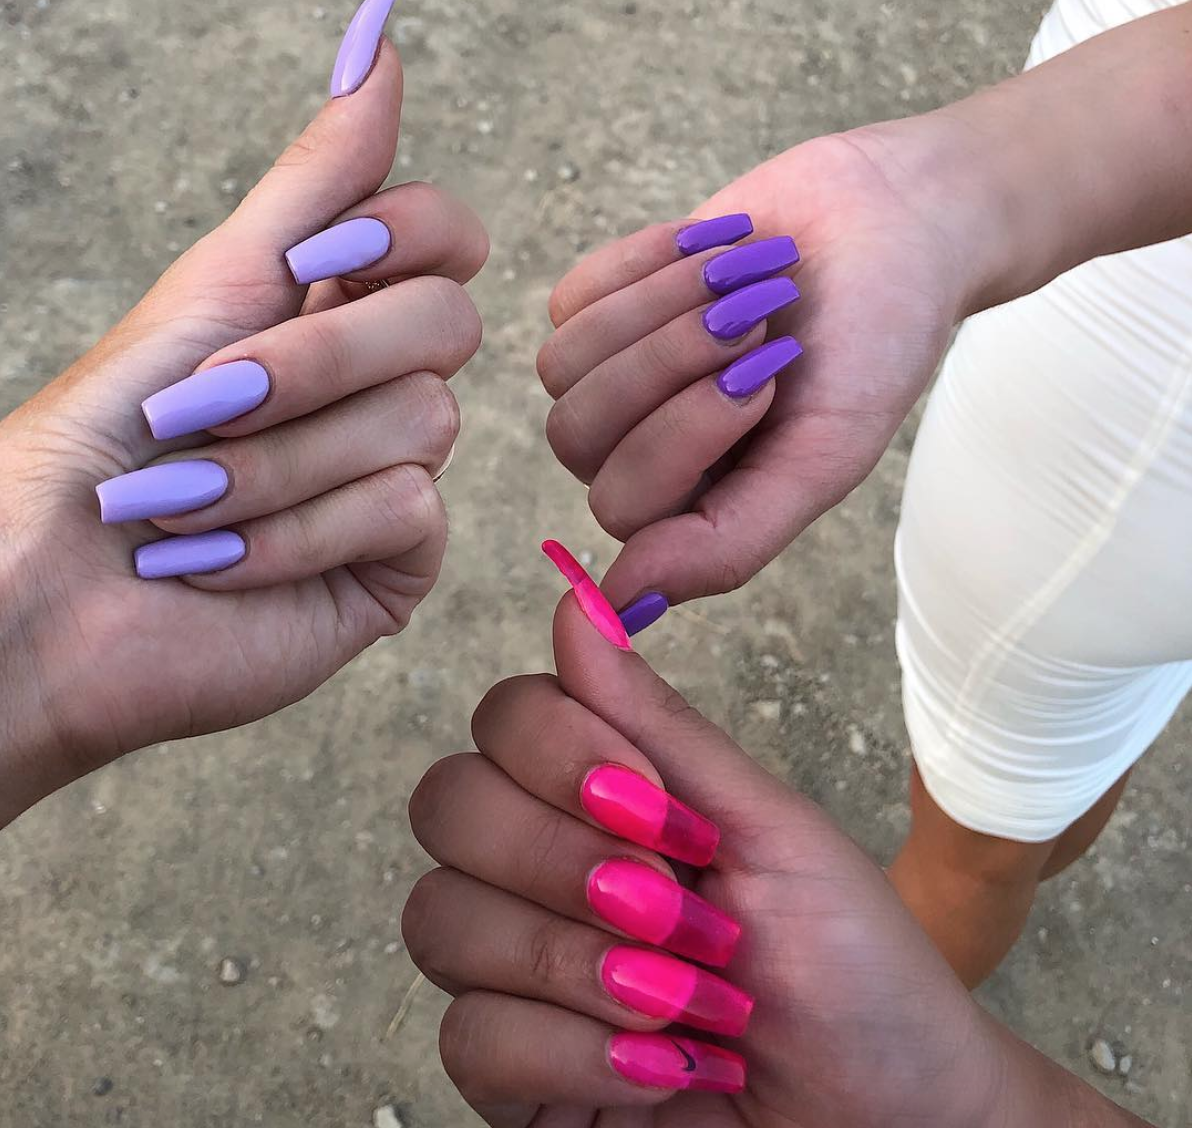 31 best nail designs of 2018 - latest nail art trends & ideas to try